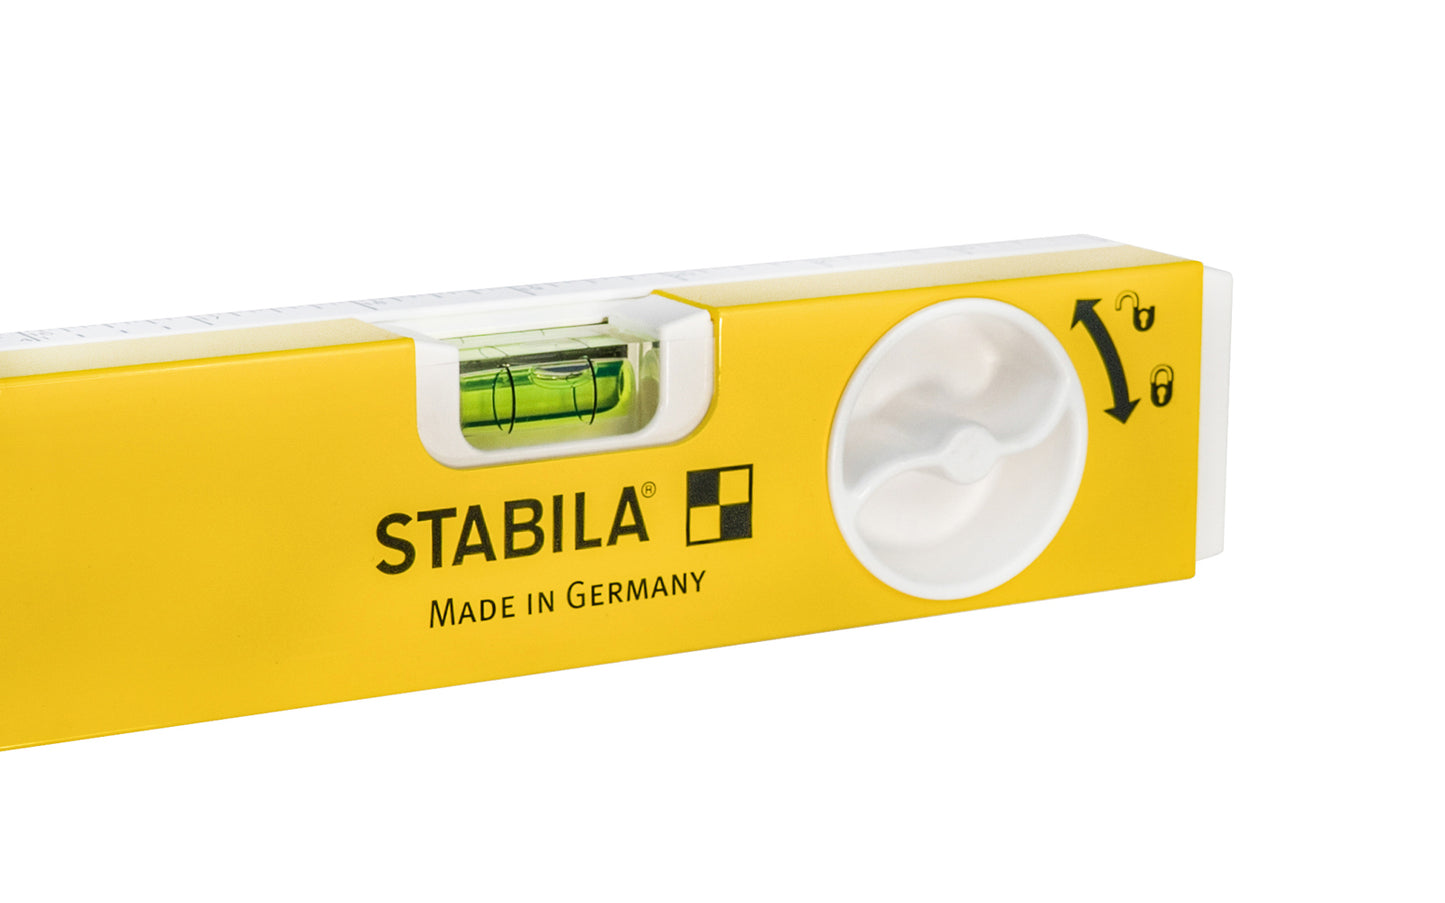 Stabila 25-41" Extendable Level ~ Type 80-T - Model No. 29441 - For fitting windows & doors – work out internal dimensions & align window & door frames. For plumbing installations – install shower trays & baths in a variety of sizes. To extend the length of the level, just pull out to the length needed & lock it firmly into position